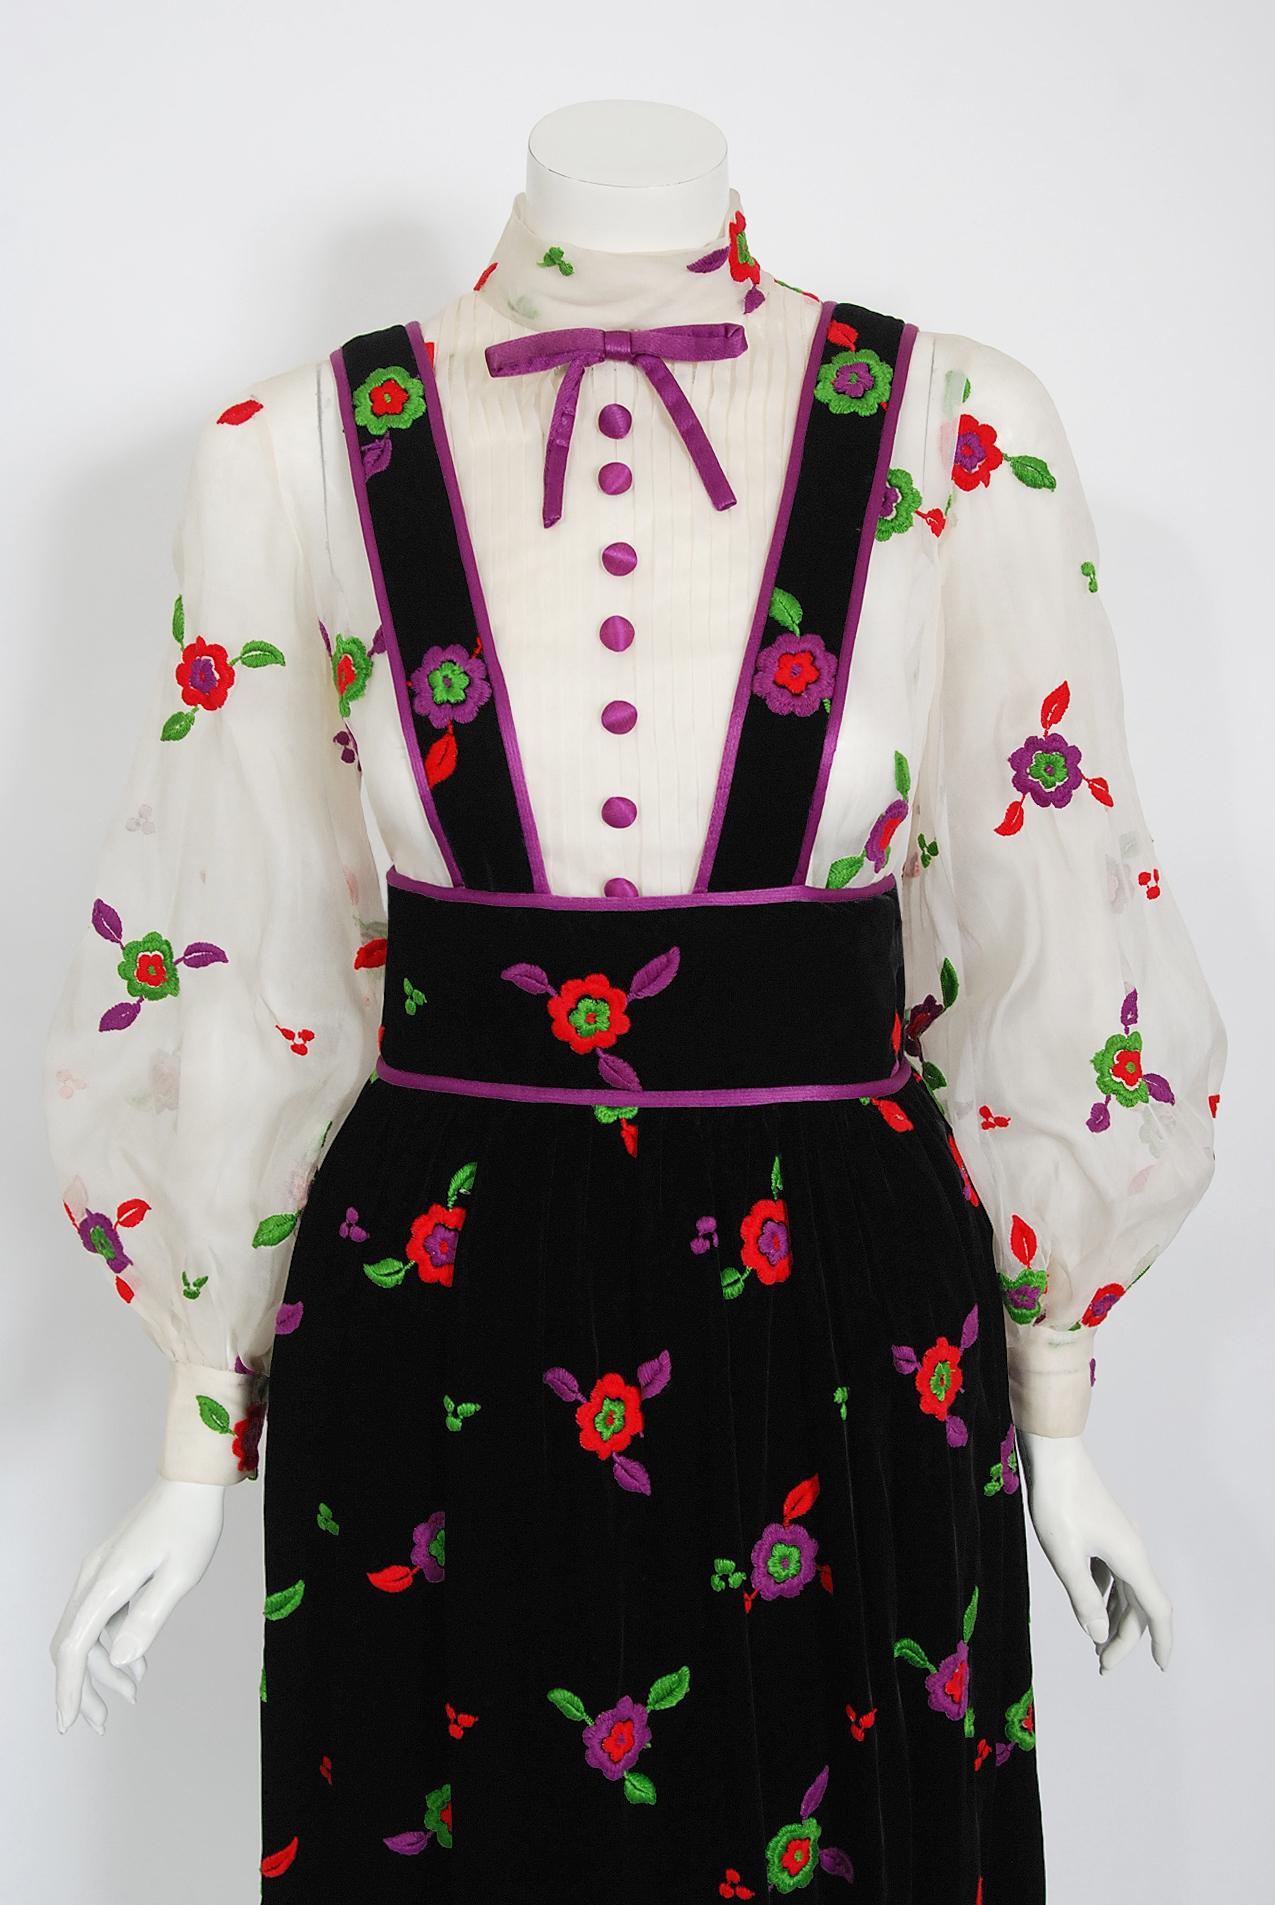 Exceptional & ultra rare Donald Brooks pinafore designer dress ensemble from the early 1970's. Brooks was perhaps one of the most important designers of the mid-twentieth century. Though he was very successful, his passion was his work for the stage